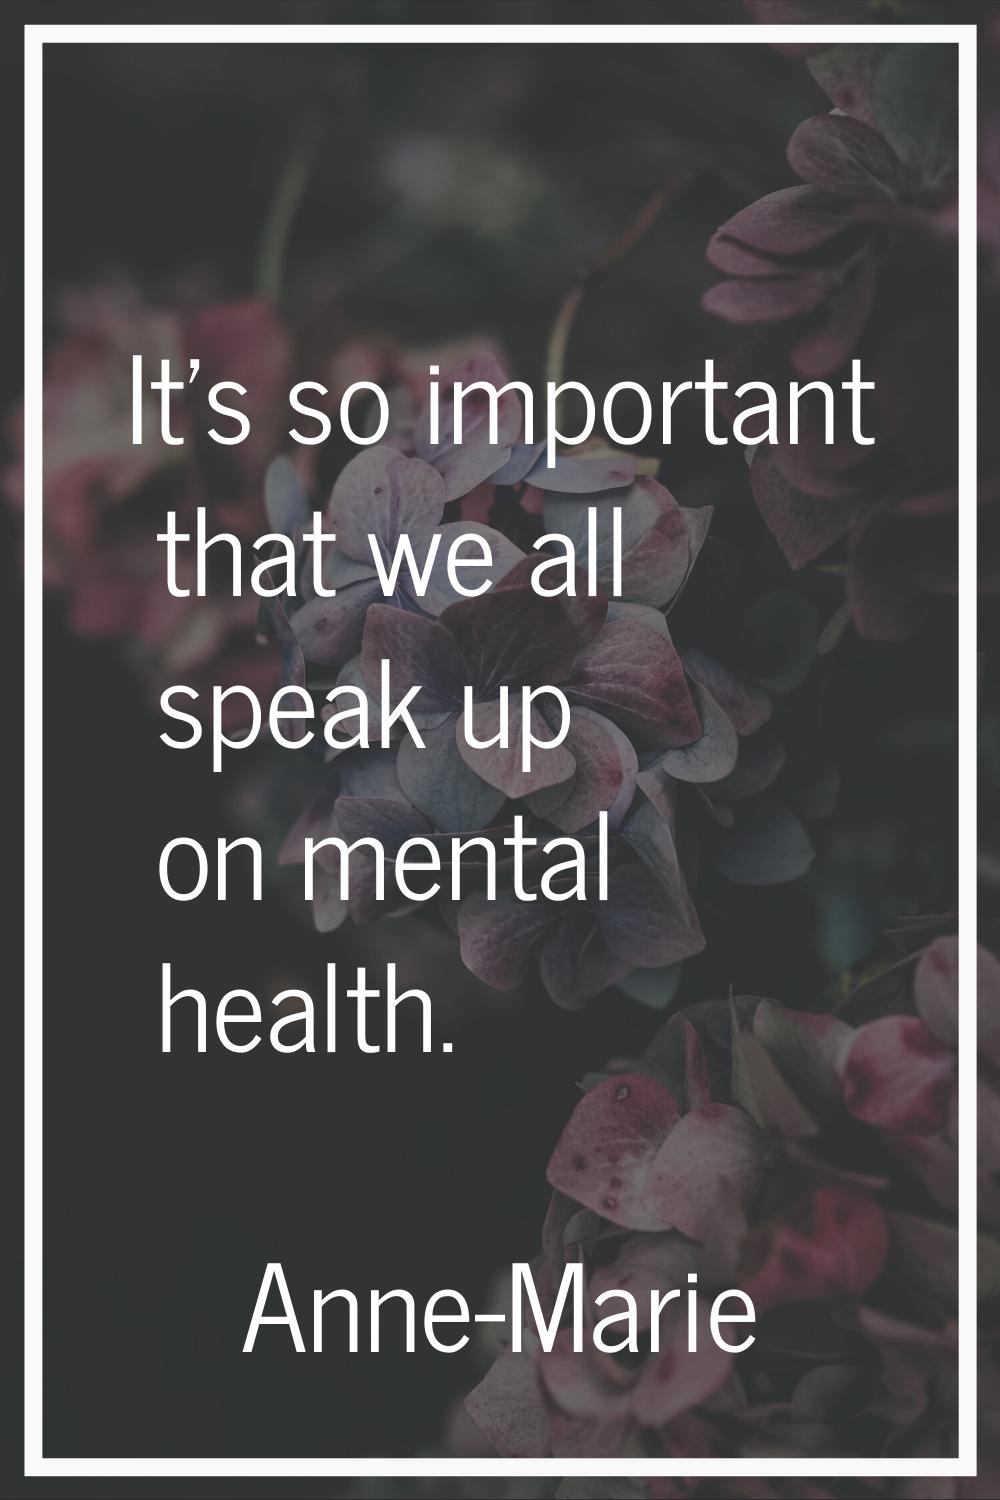 It's so important that we all speak up on mental health.